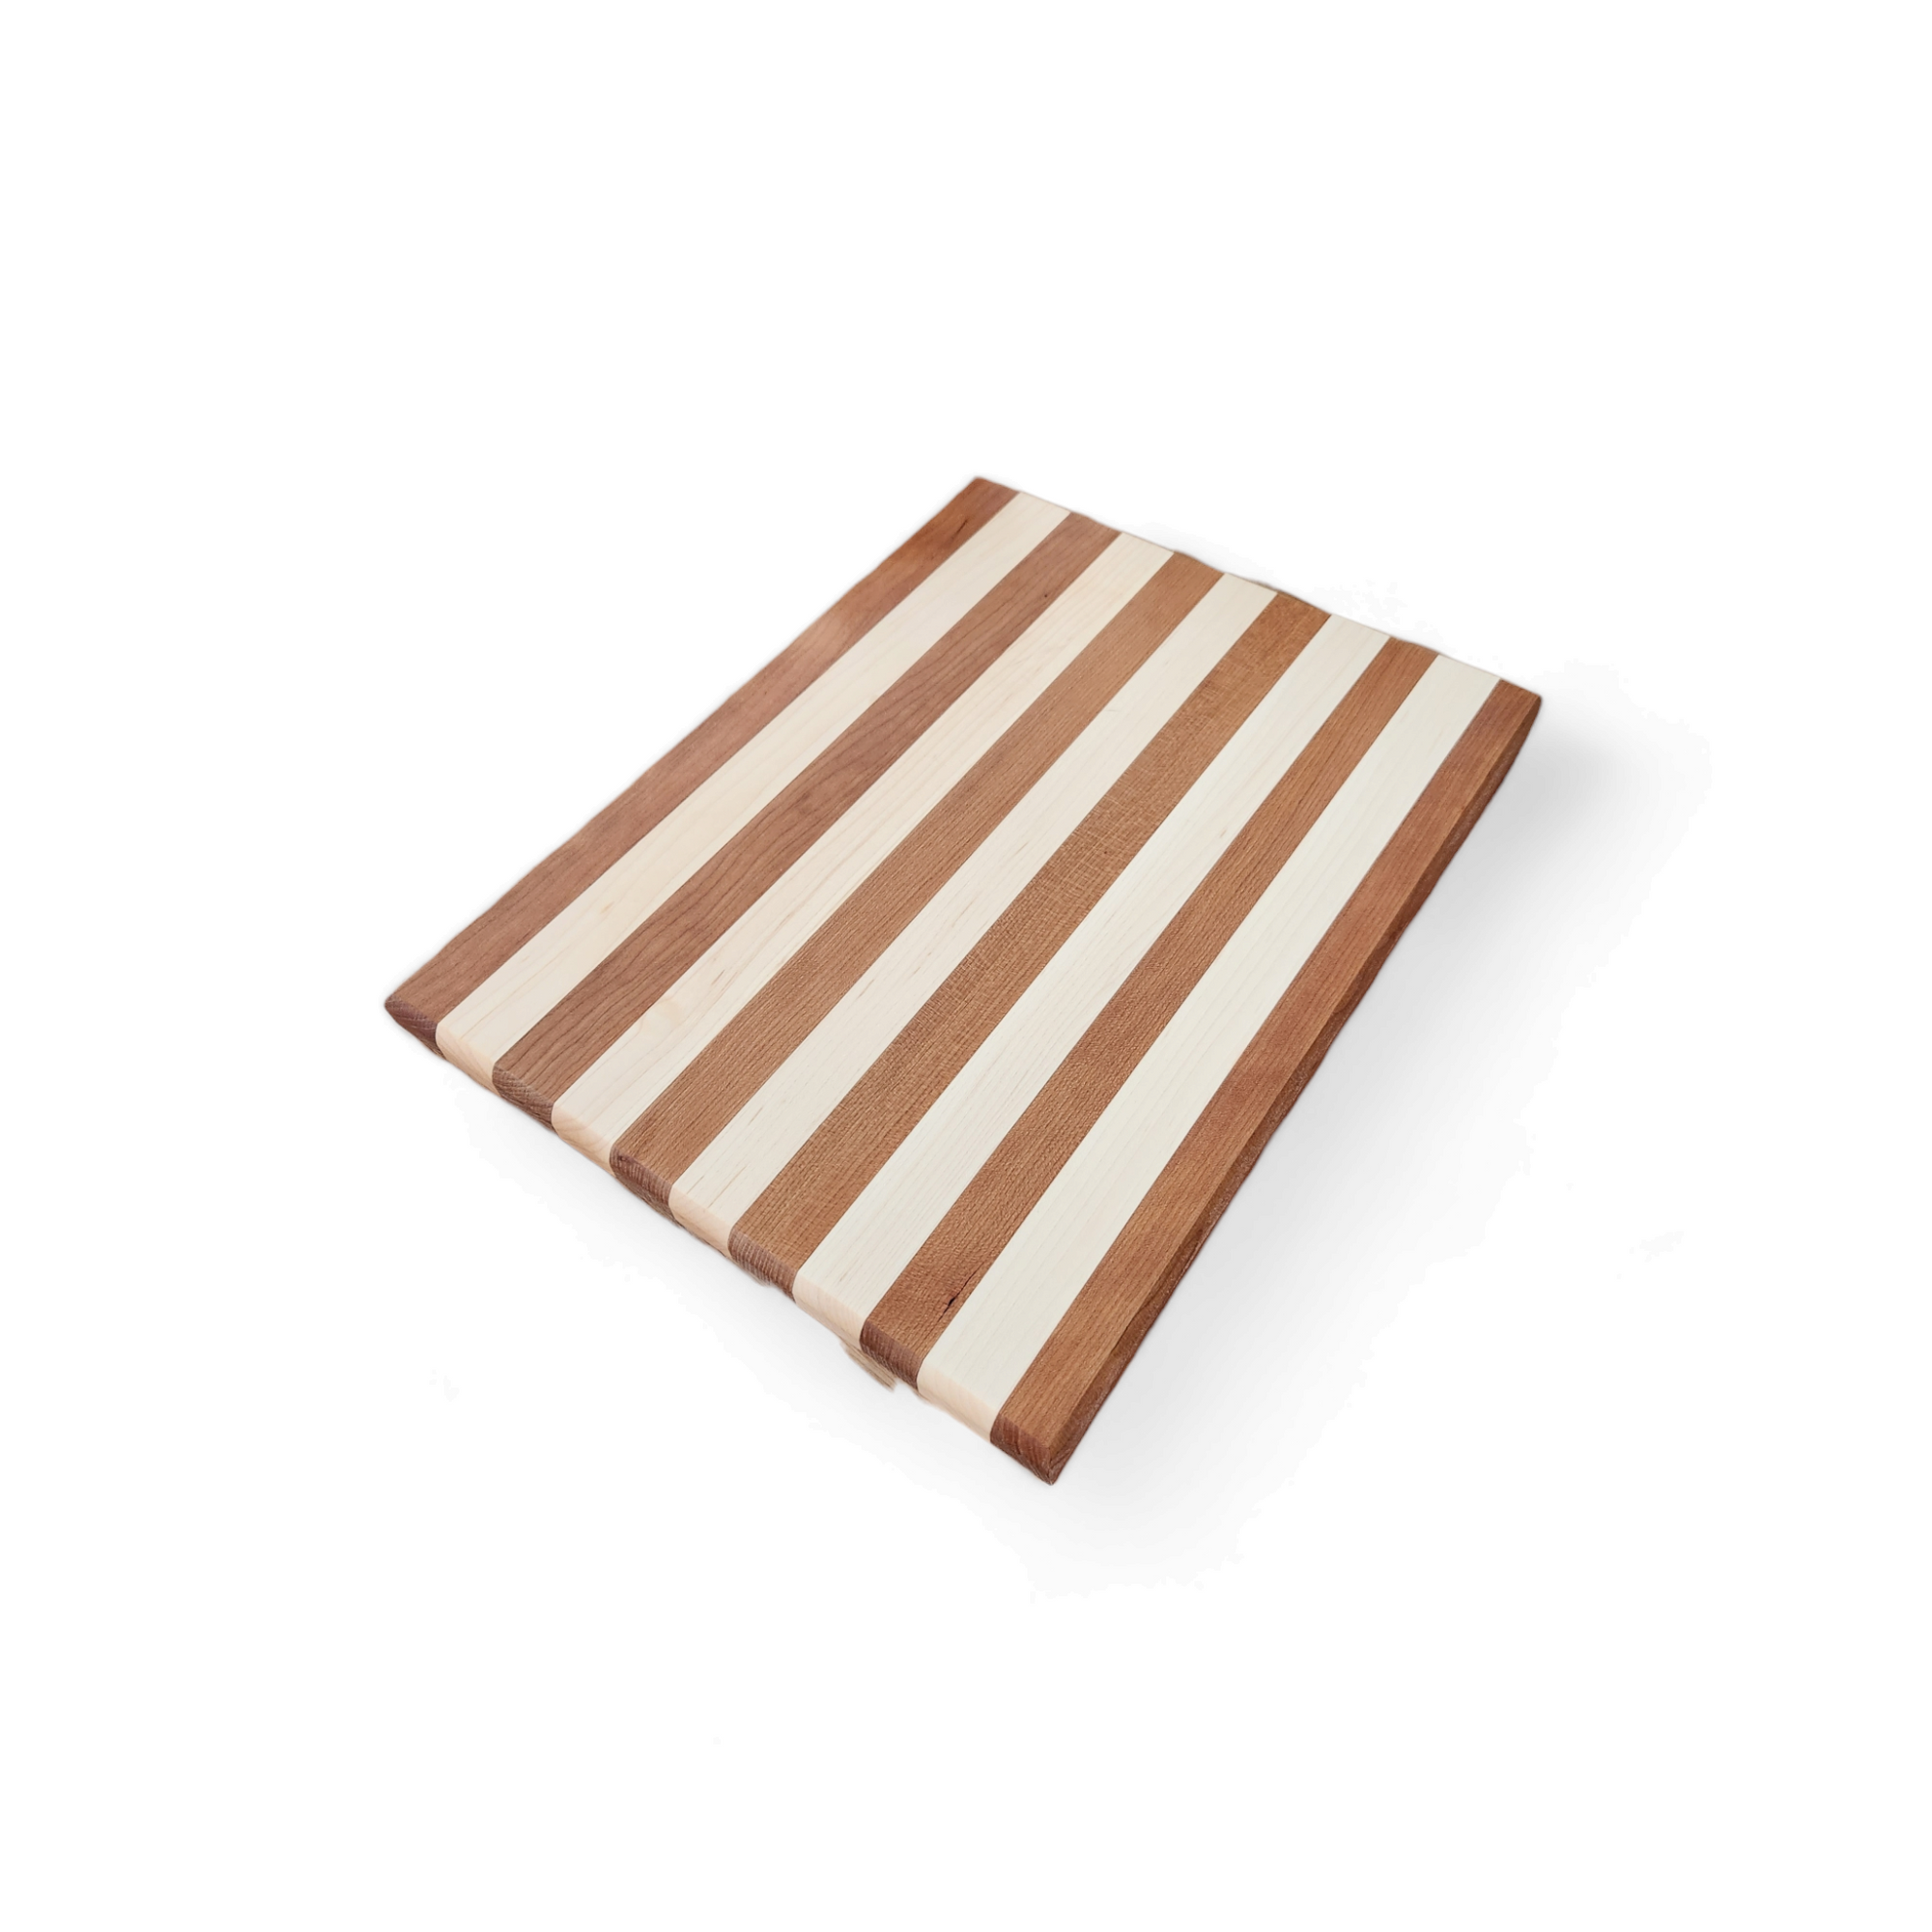 Hand-Crafted Exotic Hardwood Cutting Board - Zebrawood, Mapl